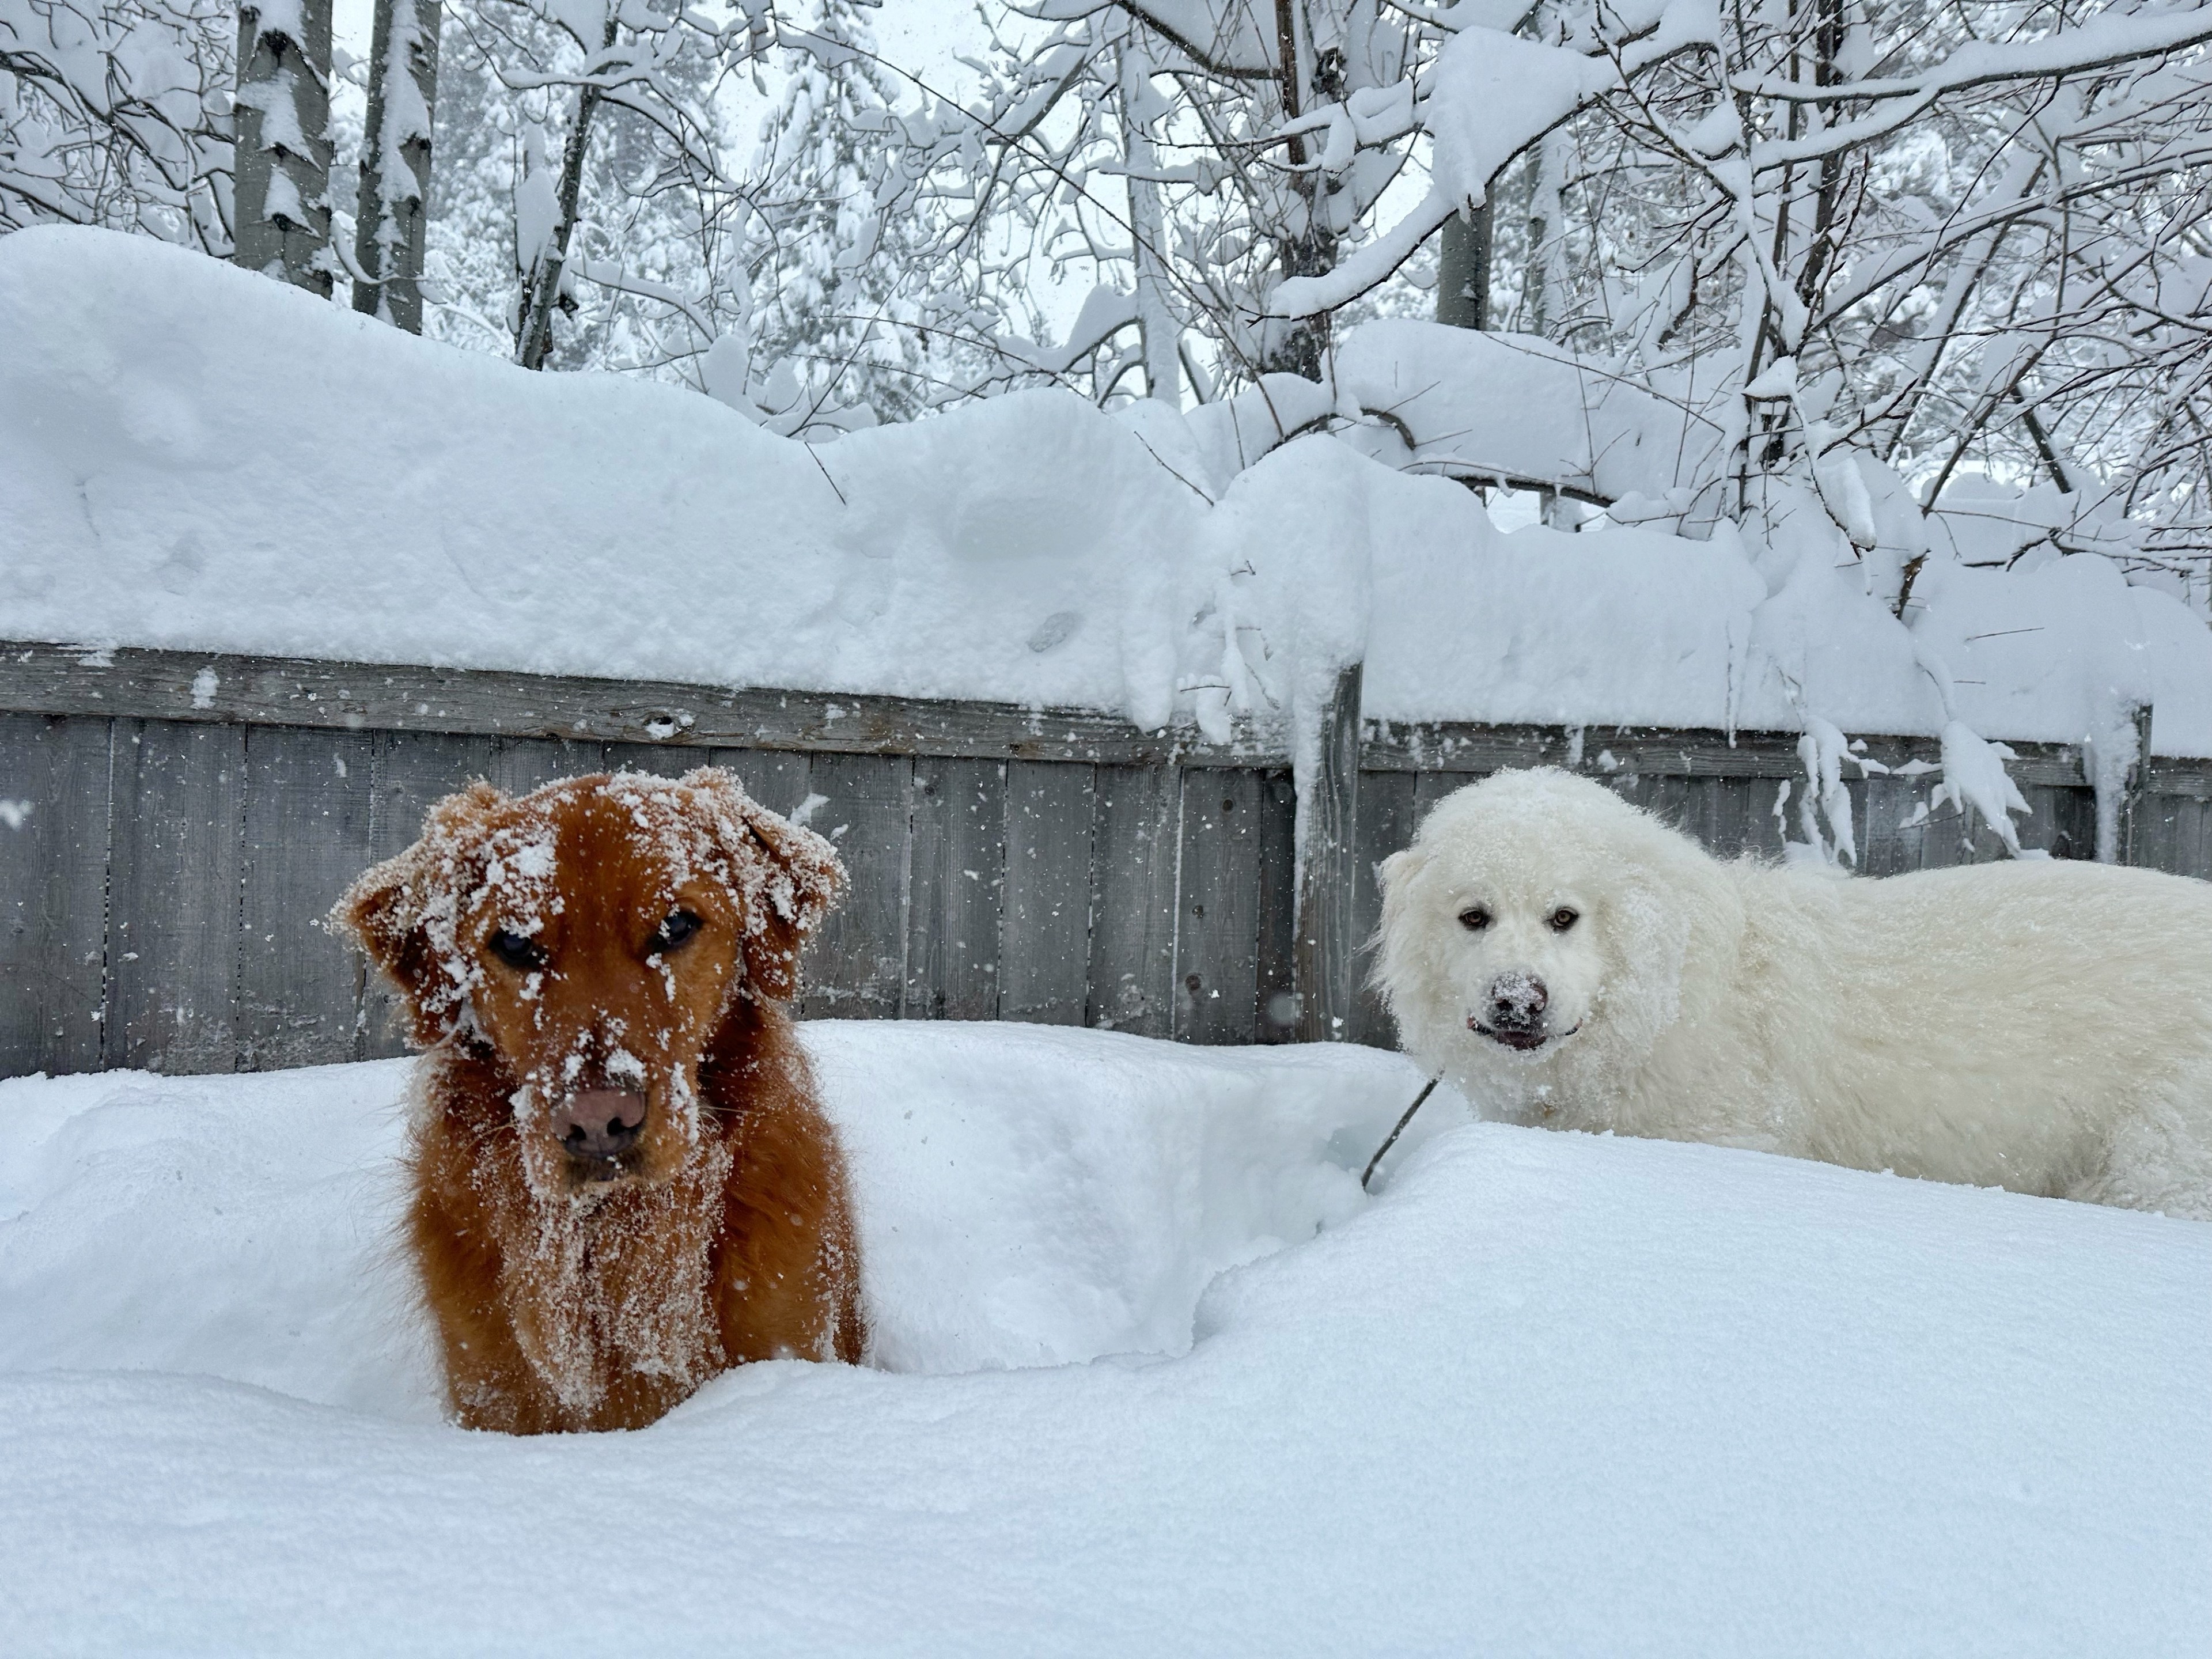 A golden retriever and a large white dog sit in the snow